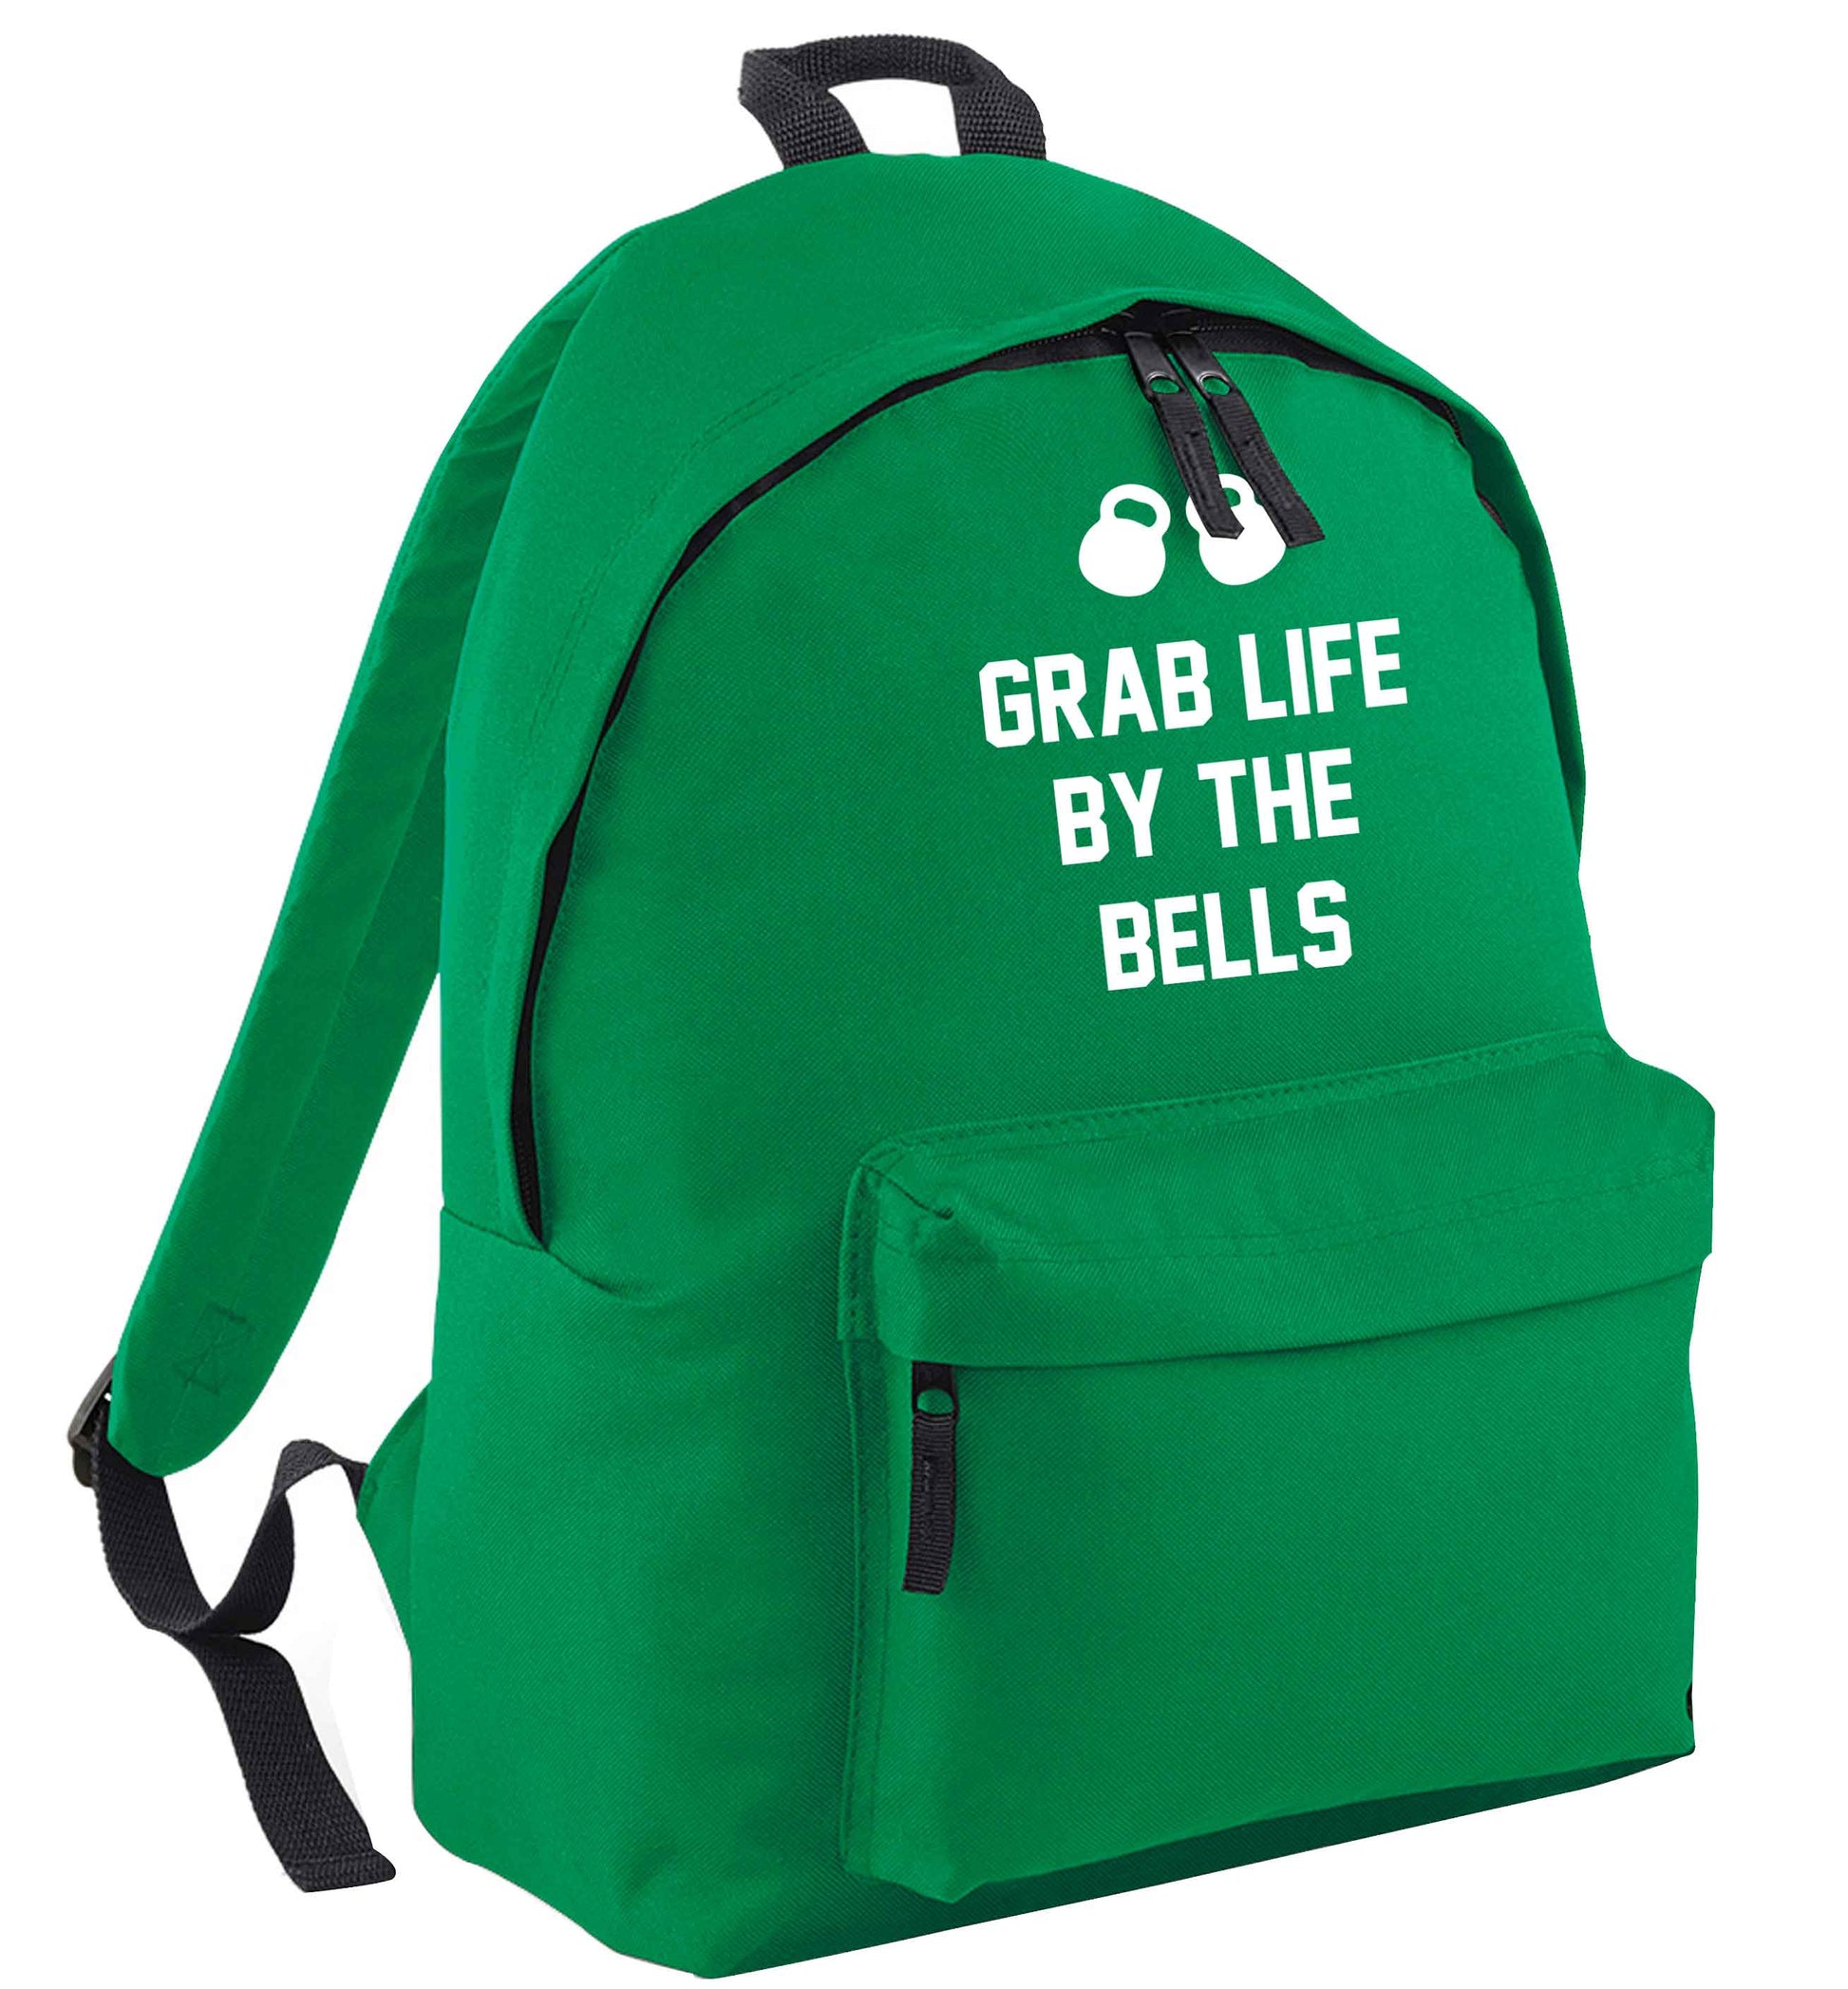 Grab life by the bells green adults backpack